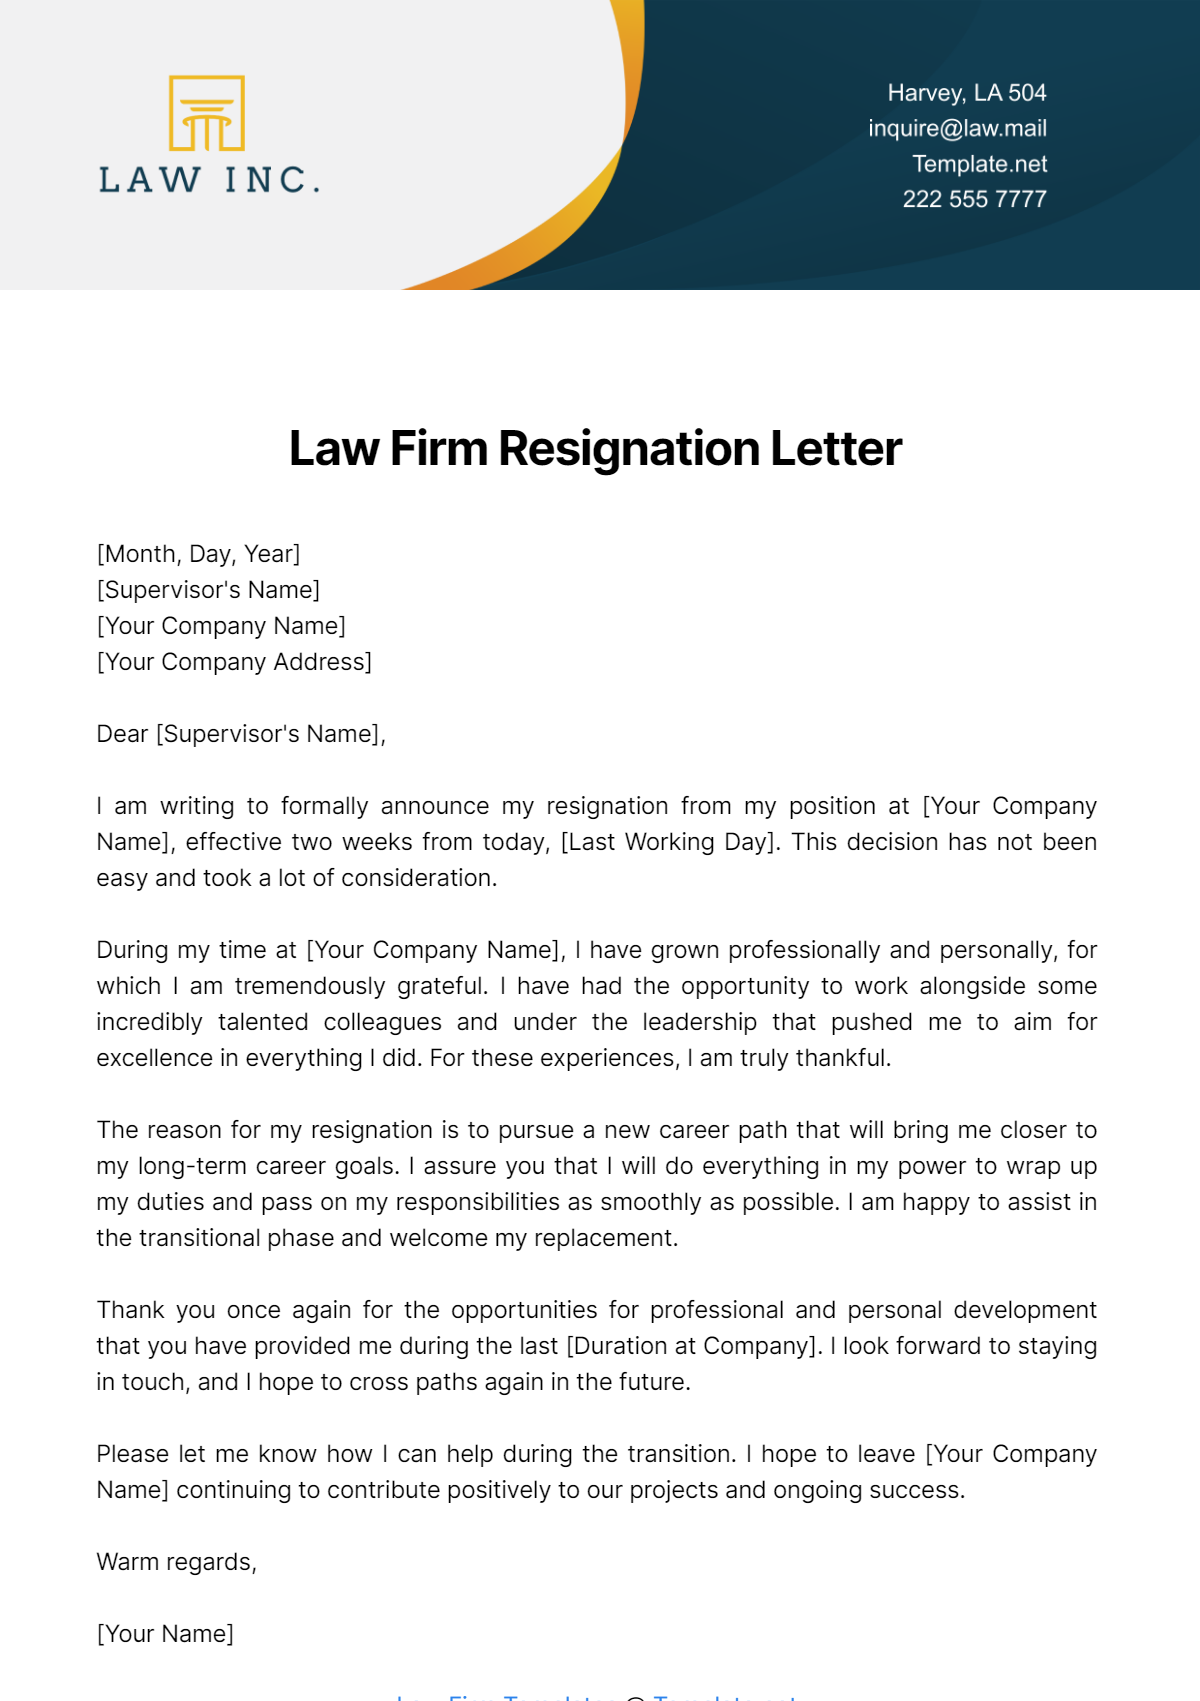 Free Law Firm Resignation Letter Template